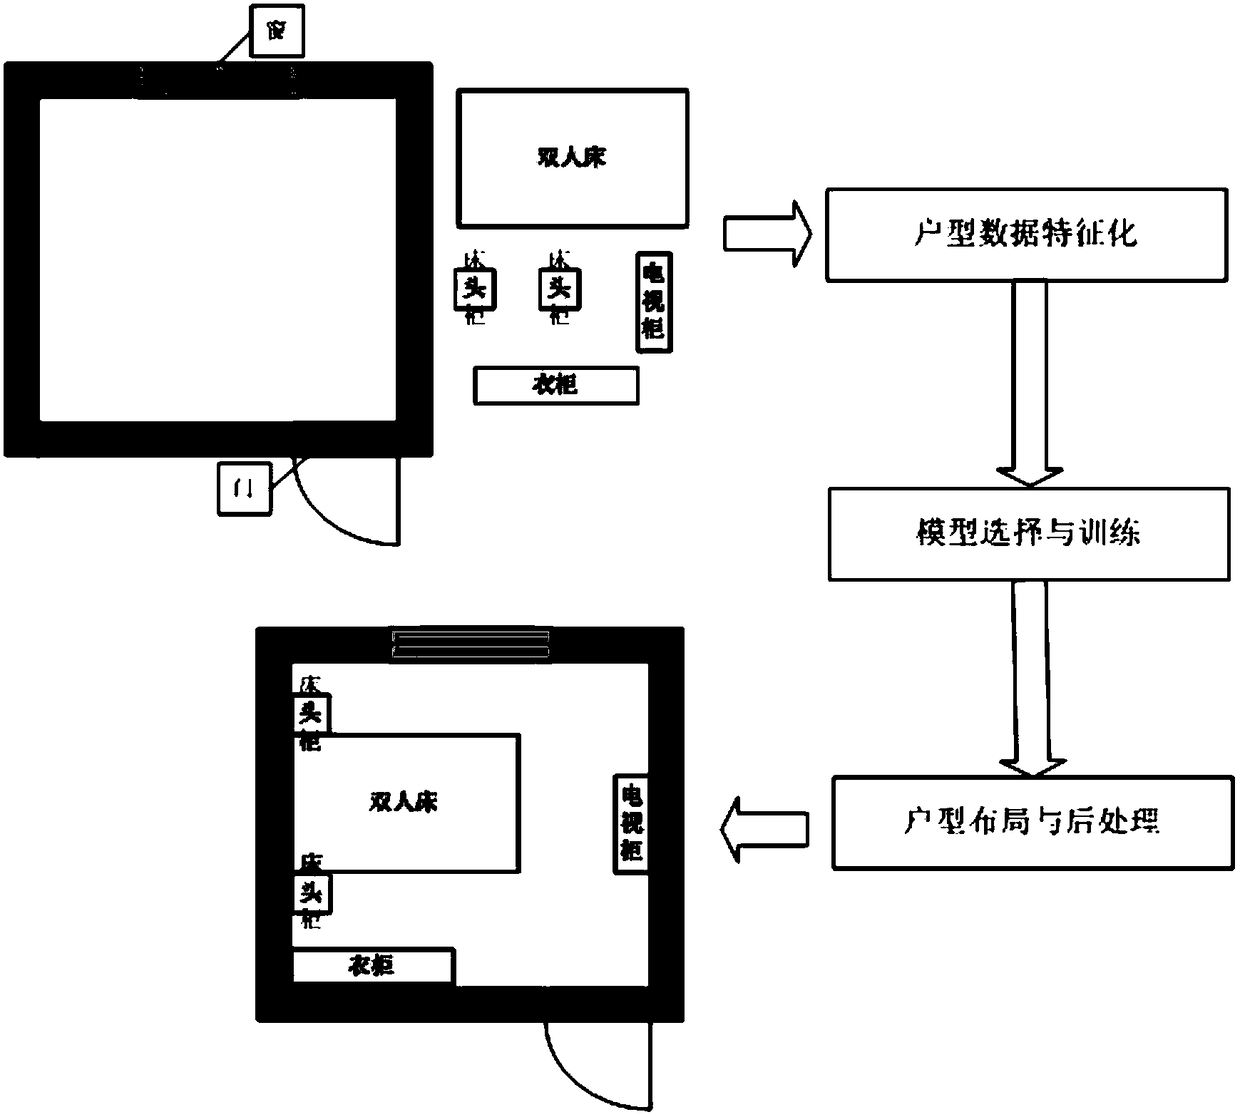 Indoor automatic layout method based on sliding window features and regression prediction